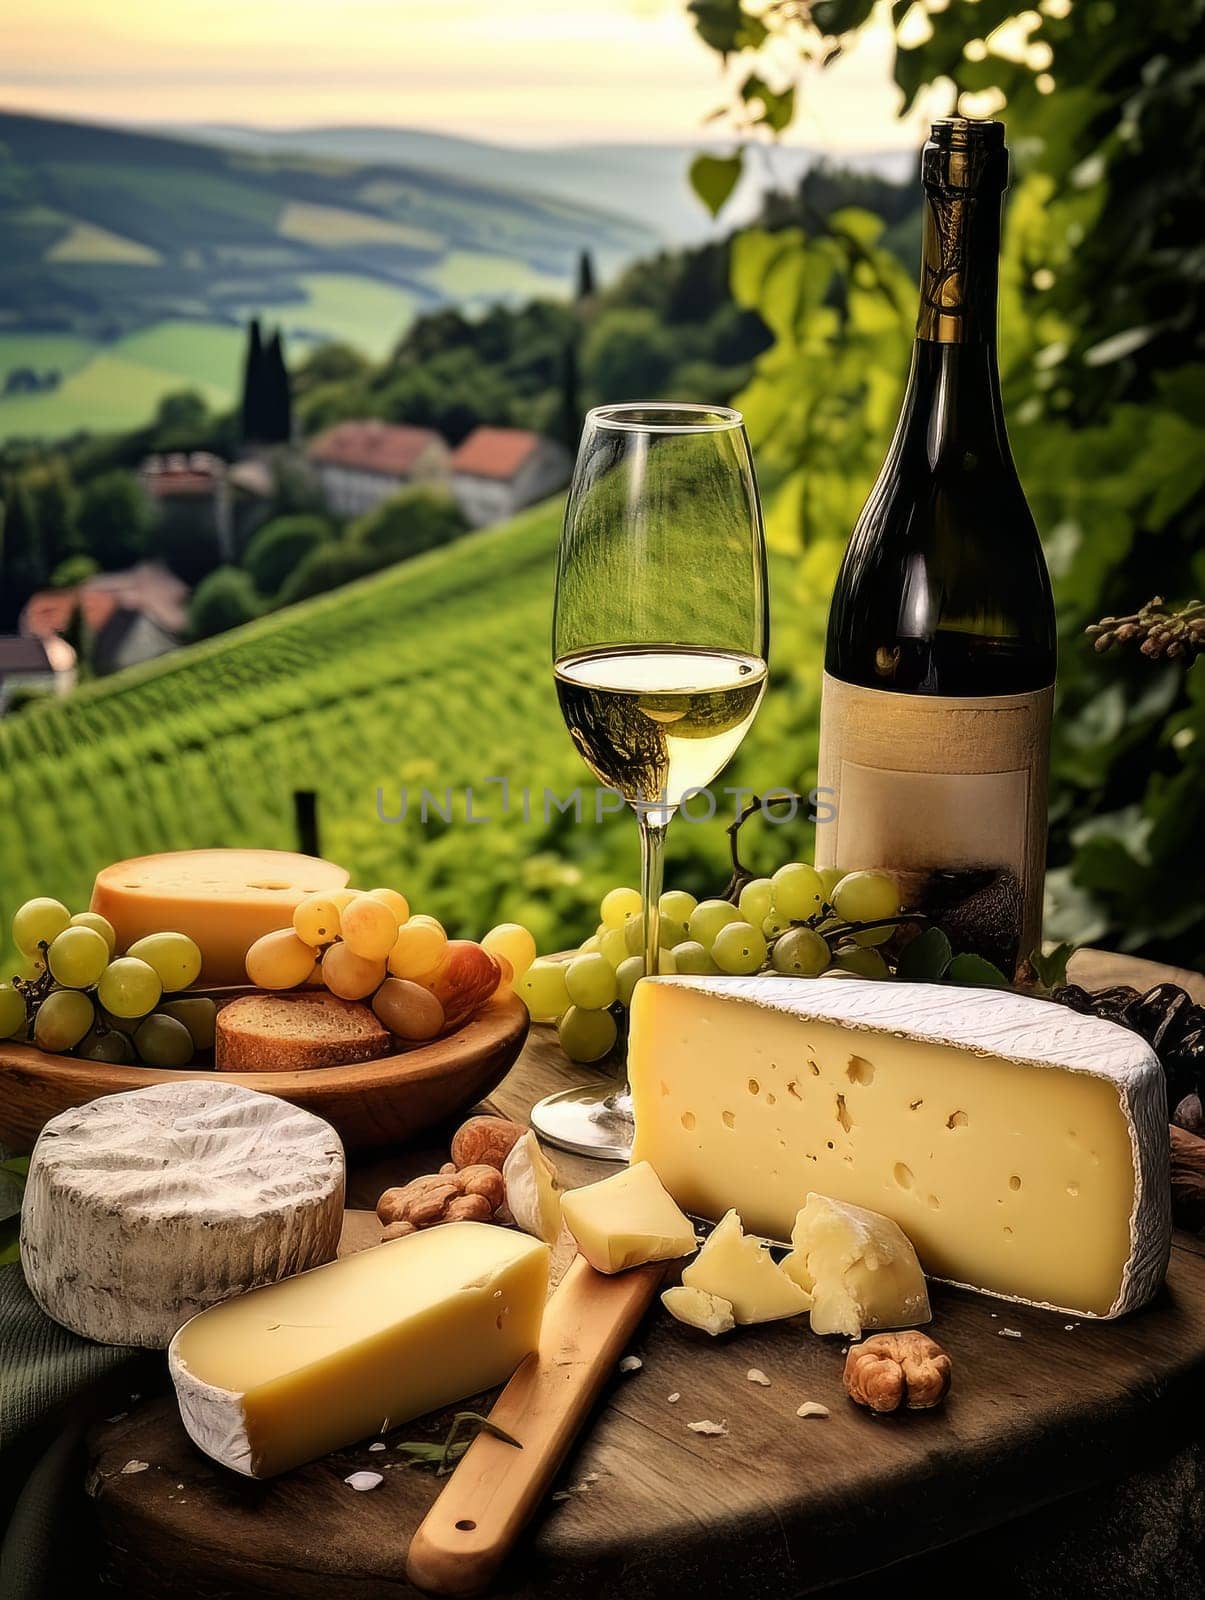 Board with cheeses, white wine in a glass and grapes. Still life of table for tasting cheese and wine, cozy romantic atmosphere, outdoor village panorama on a warm sunny day AI